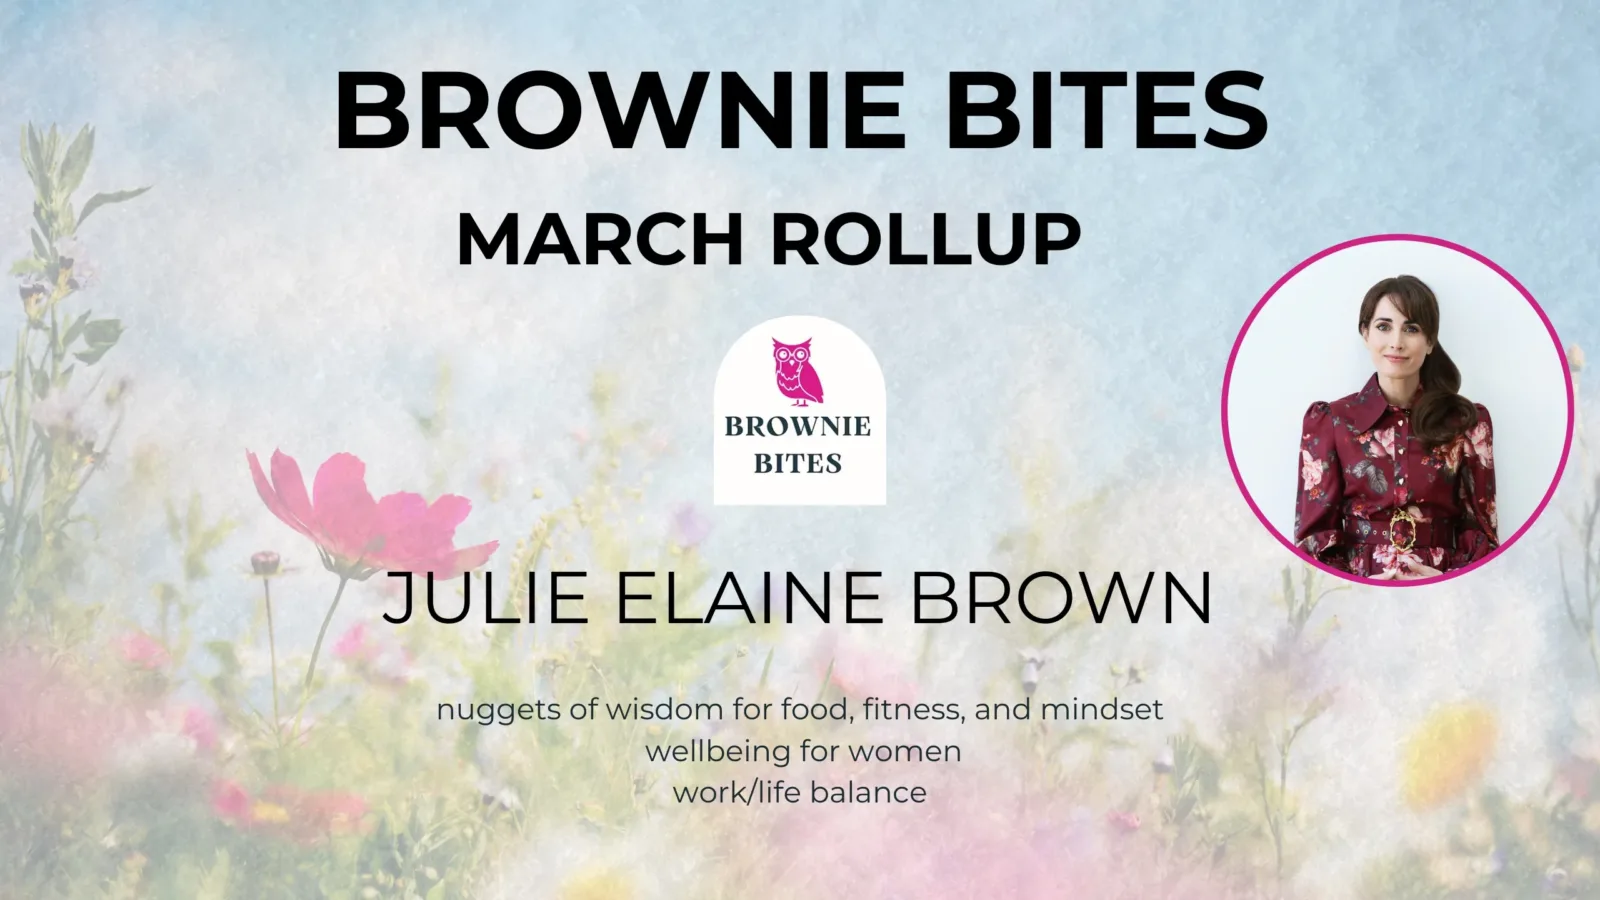 Brownie Bites newsletter, nuggets of wisdom for food, fitness, wellbeing and balance 